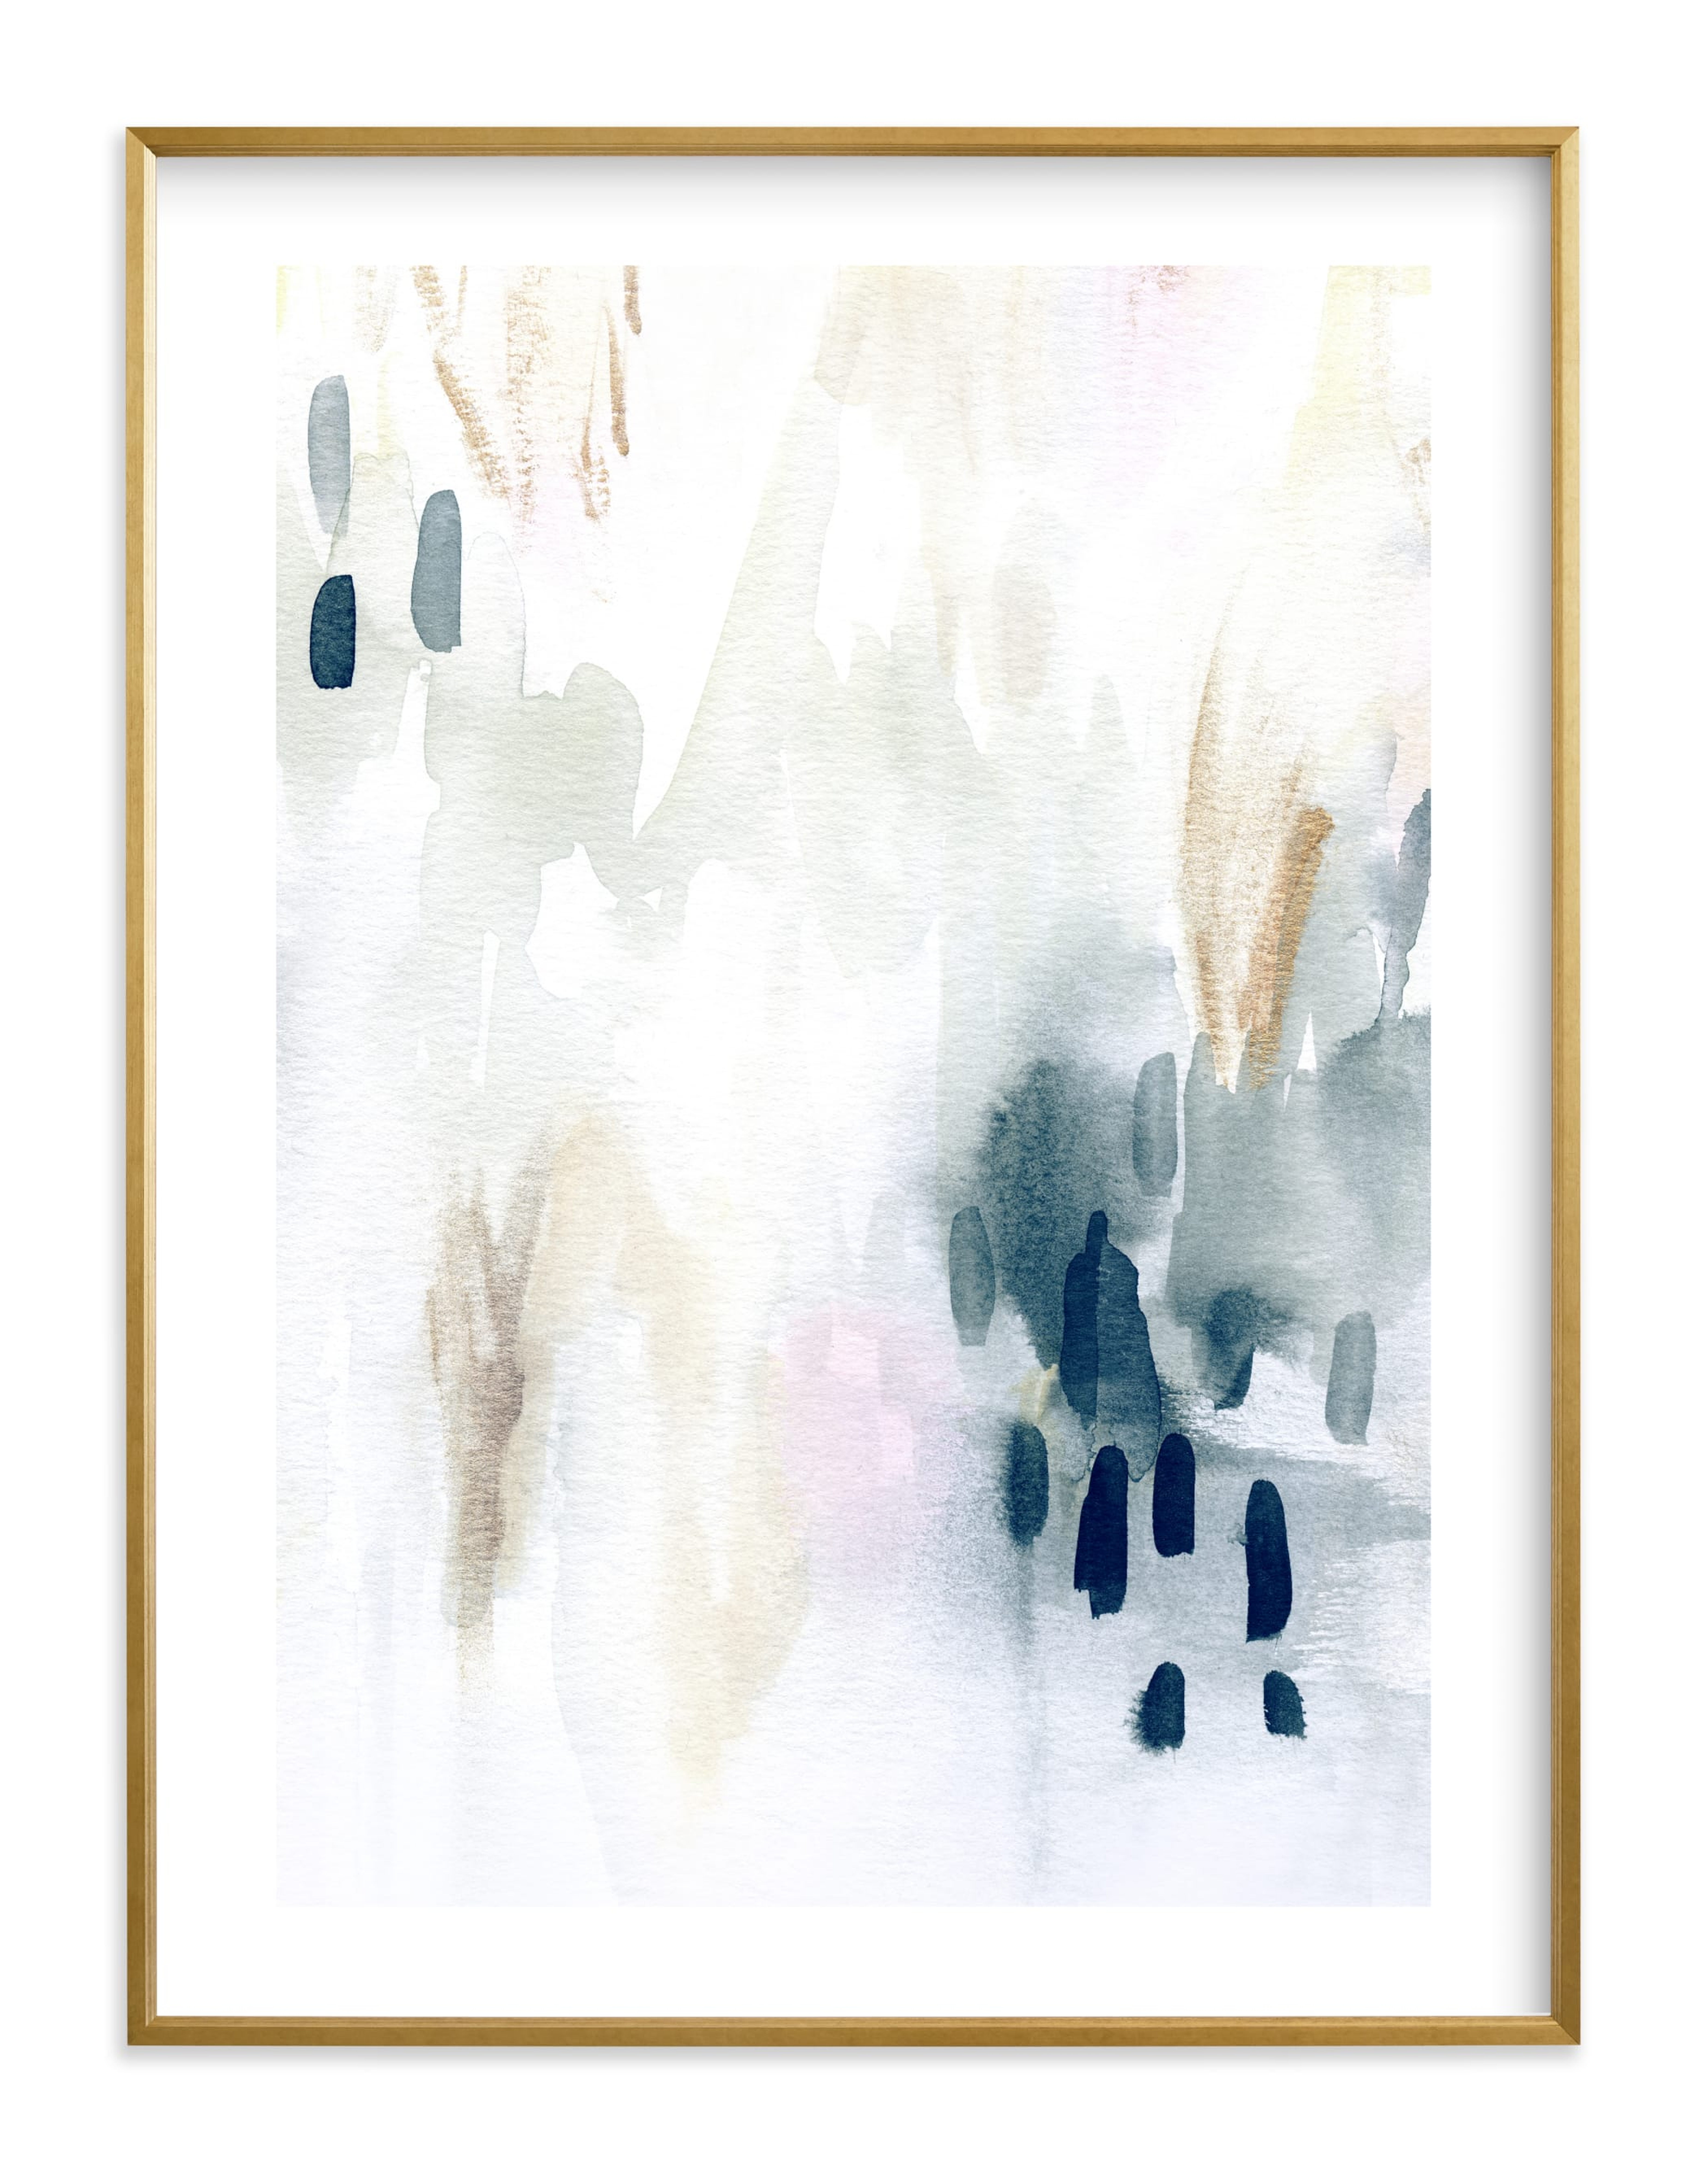 Ever Softly - 30"x40" - Art Print - 30" x 40" Standard Plexi & Materials White Border Color Theme: Charcoal Gilded wood frame .75" Art Print Frame Midnight - Minted